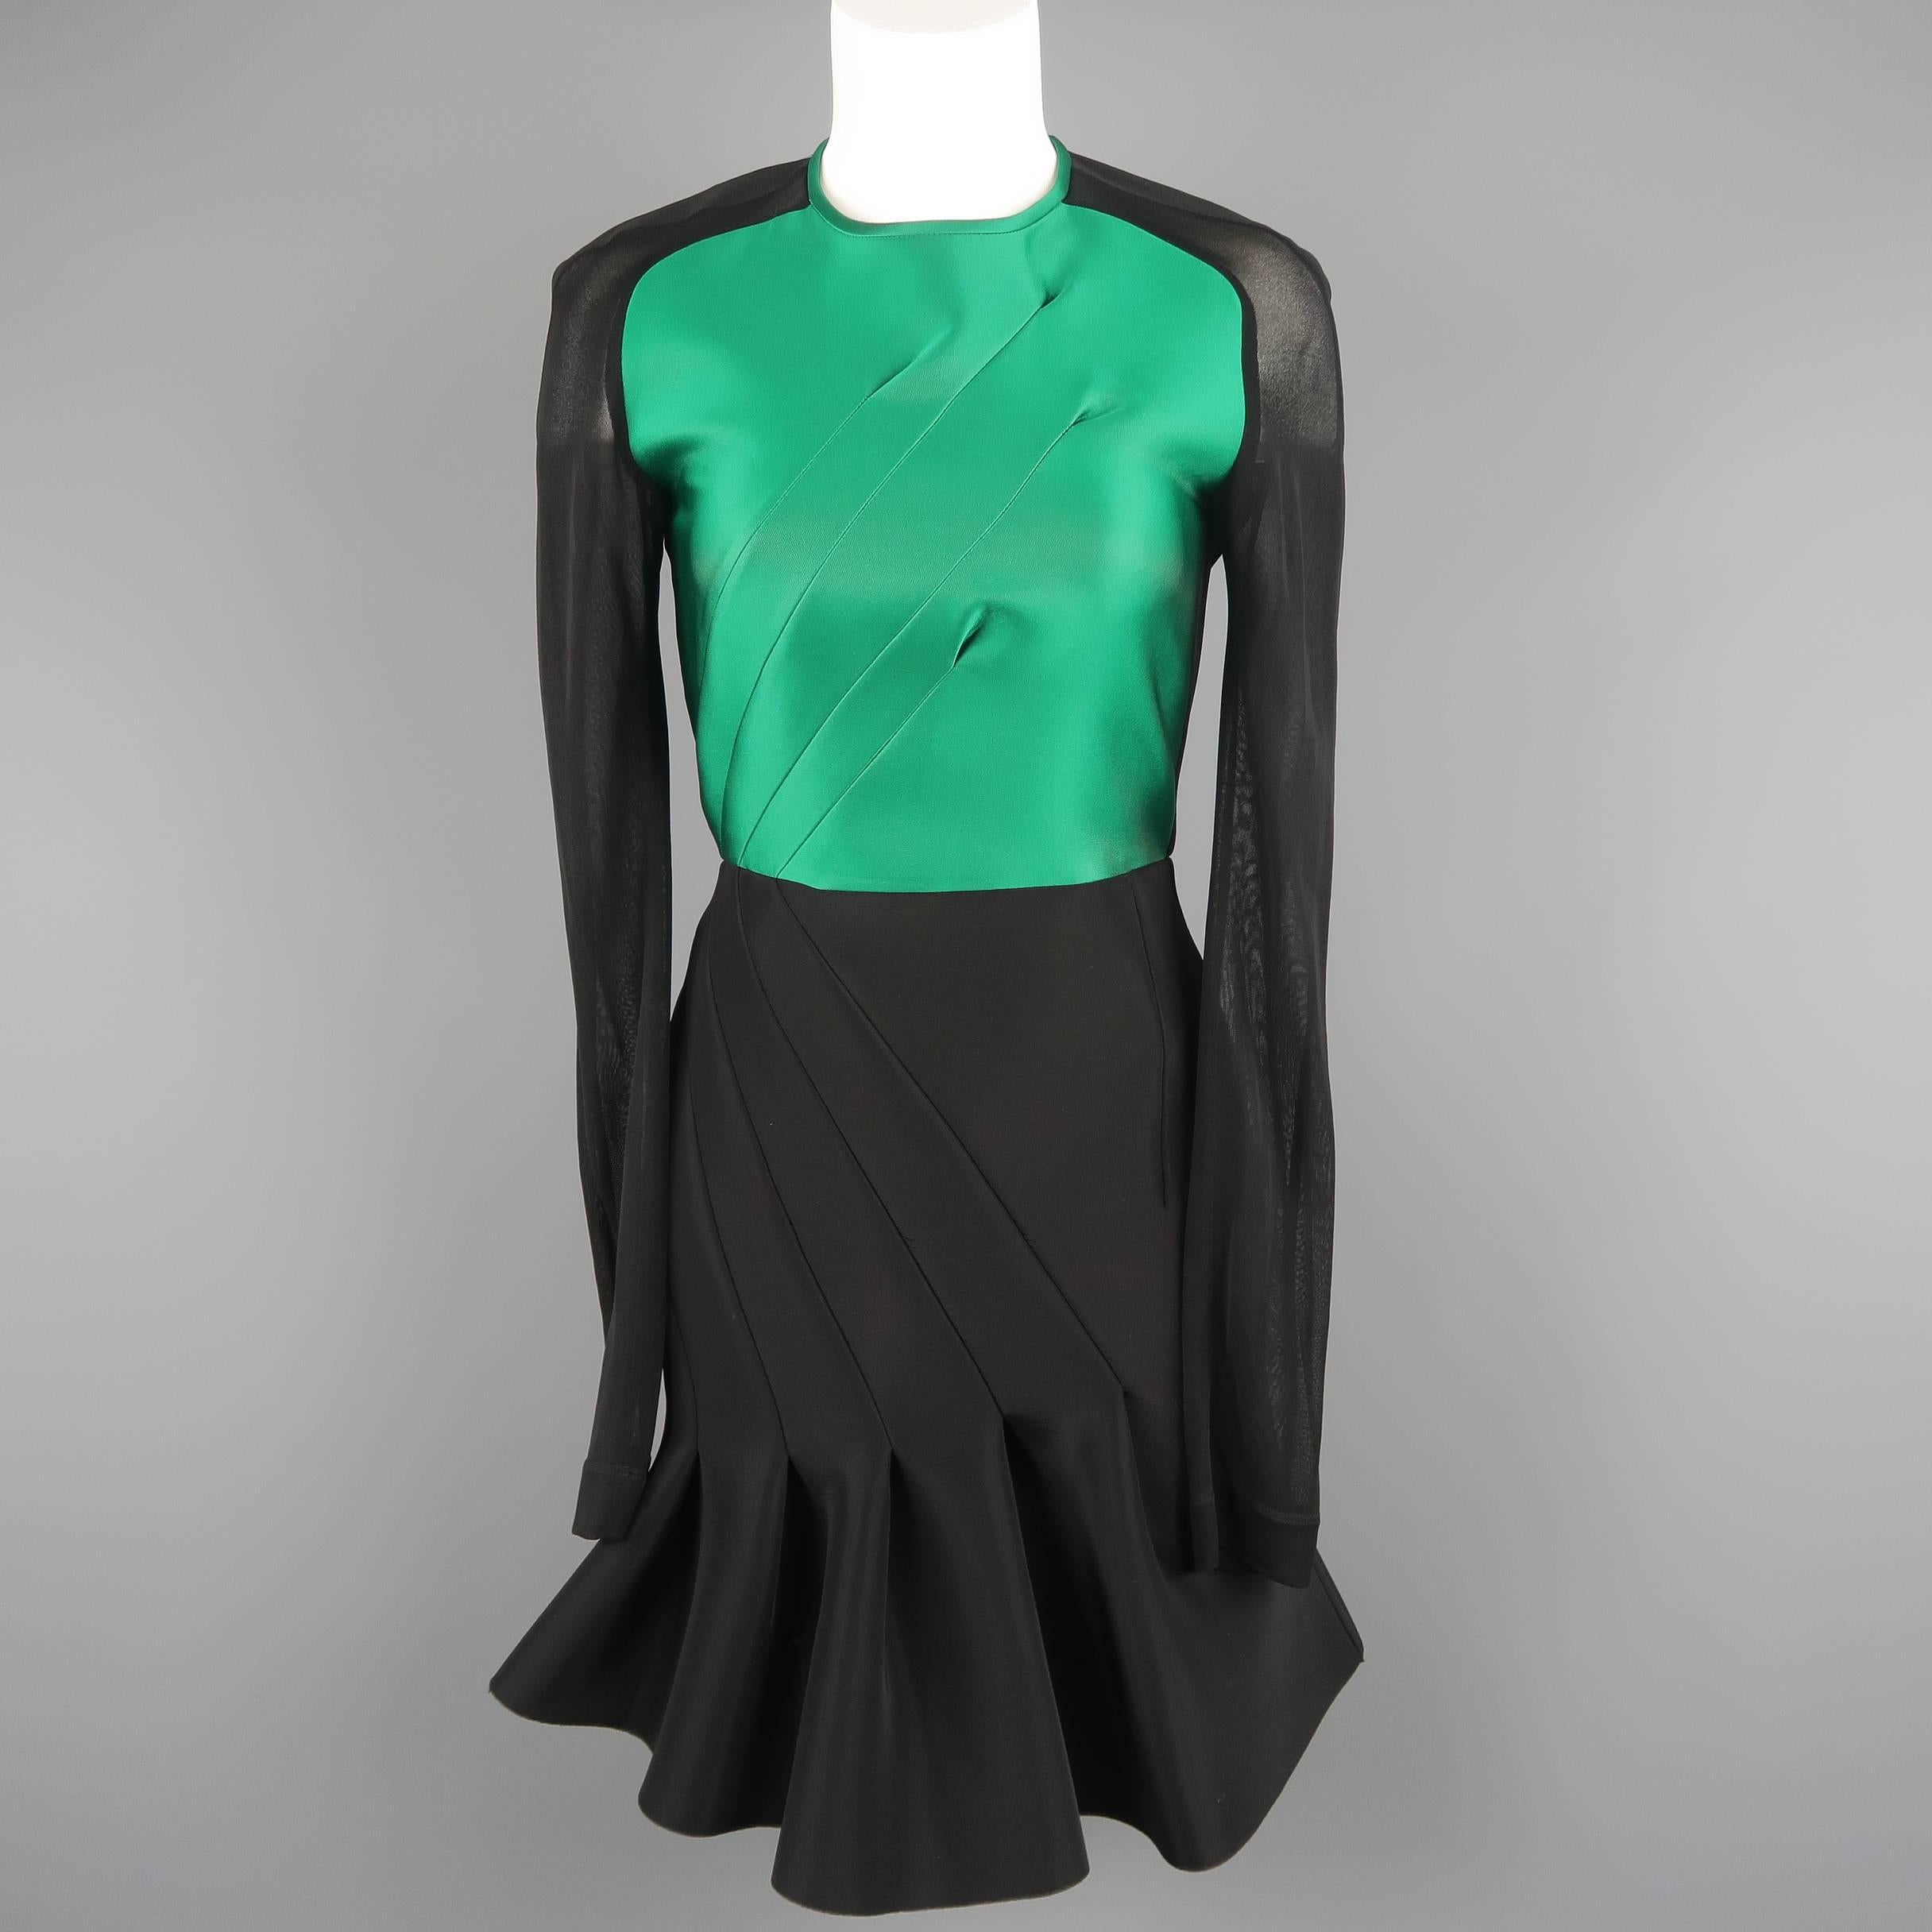 ANTONIO BERARDI dress comes in black scuba neoprene material with a green pleated top panel, sheer mesh sleeves, and a pleated ruffle hem pencil skirt. Made in Italy.
 
Excellent Pre-Owned Condition.
Marked: (no size)
 
Measurements:
Shoulder: 16